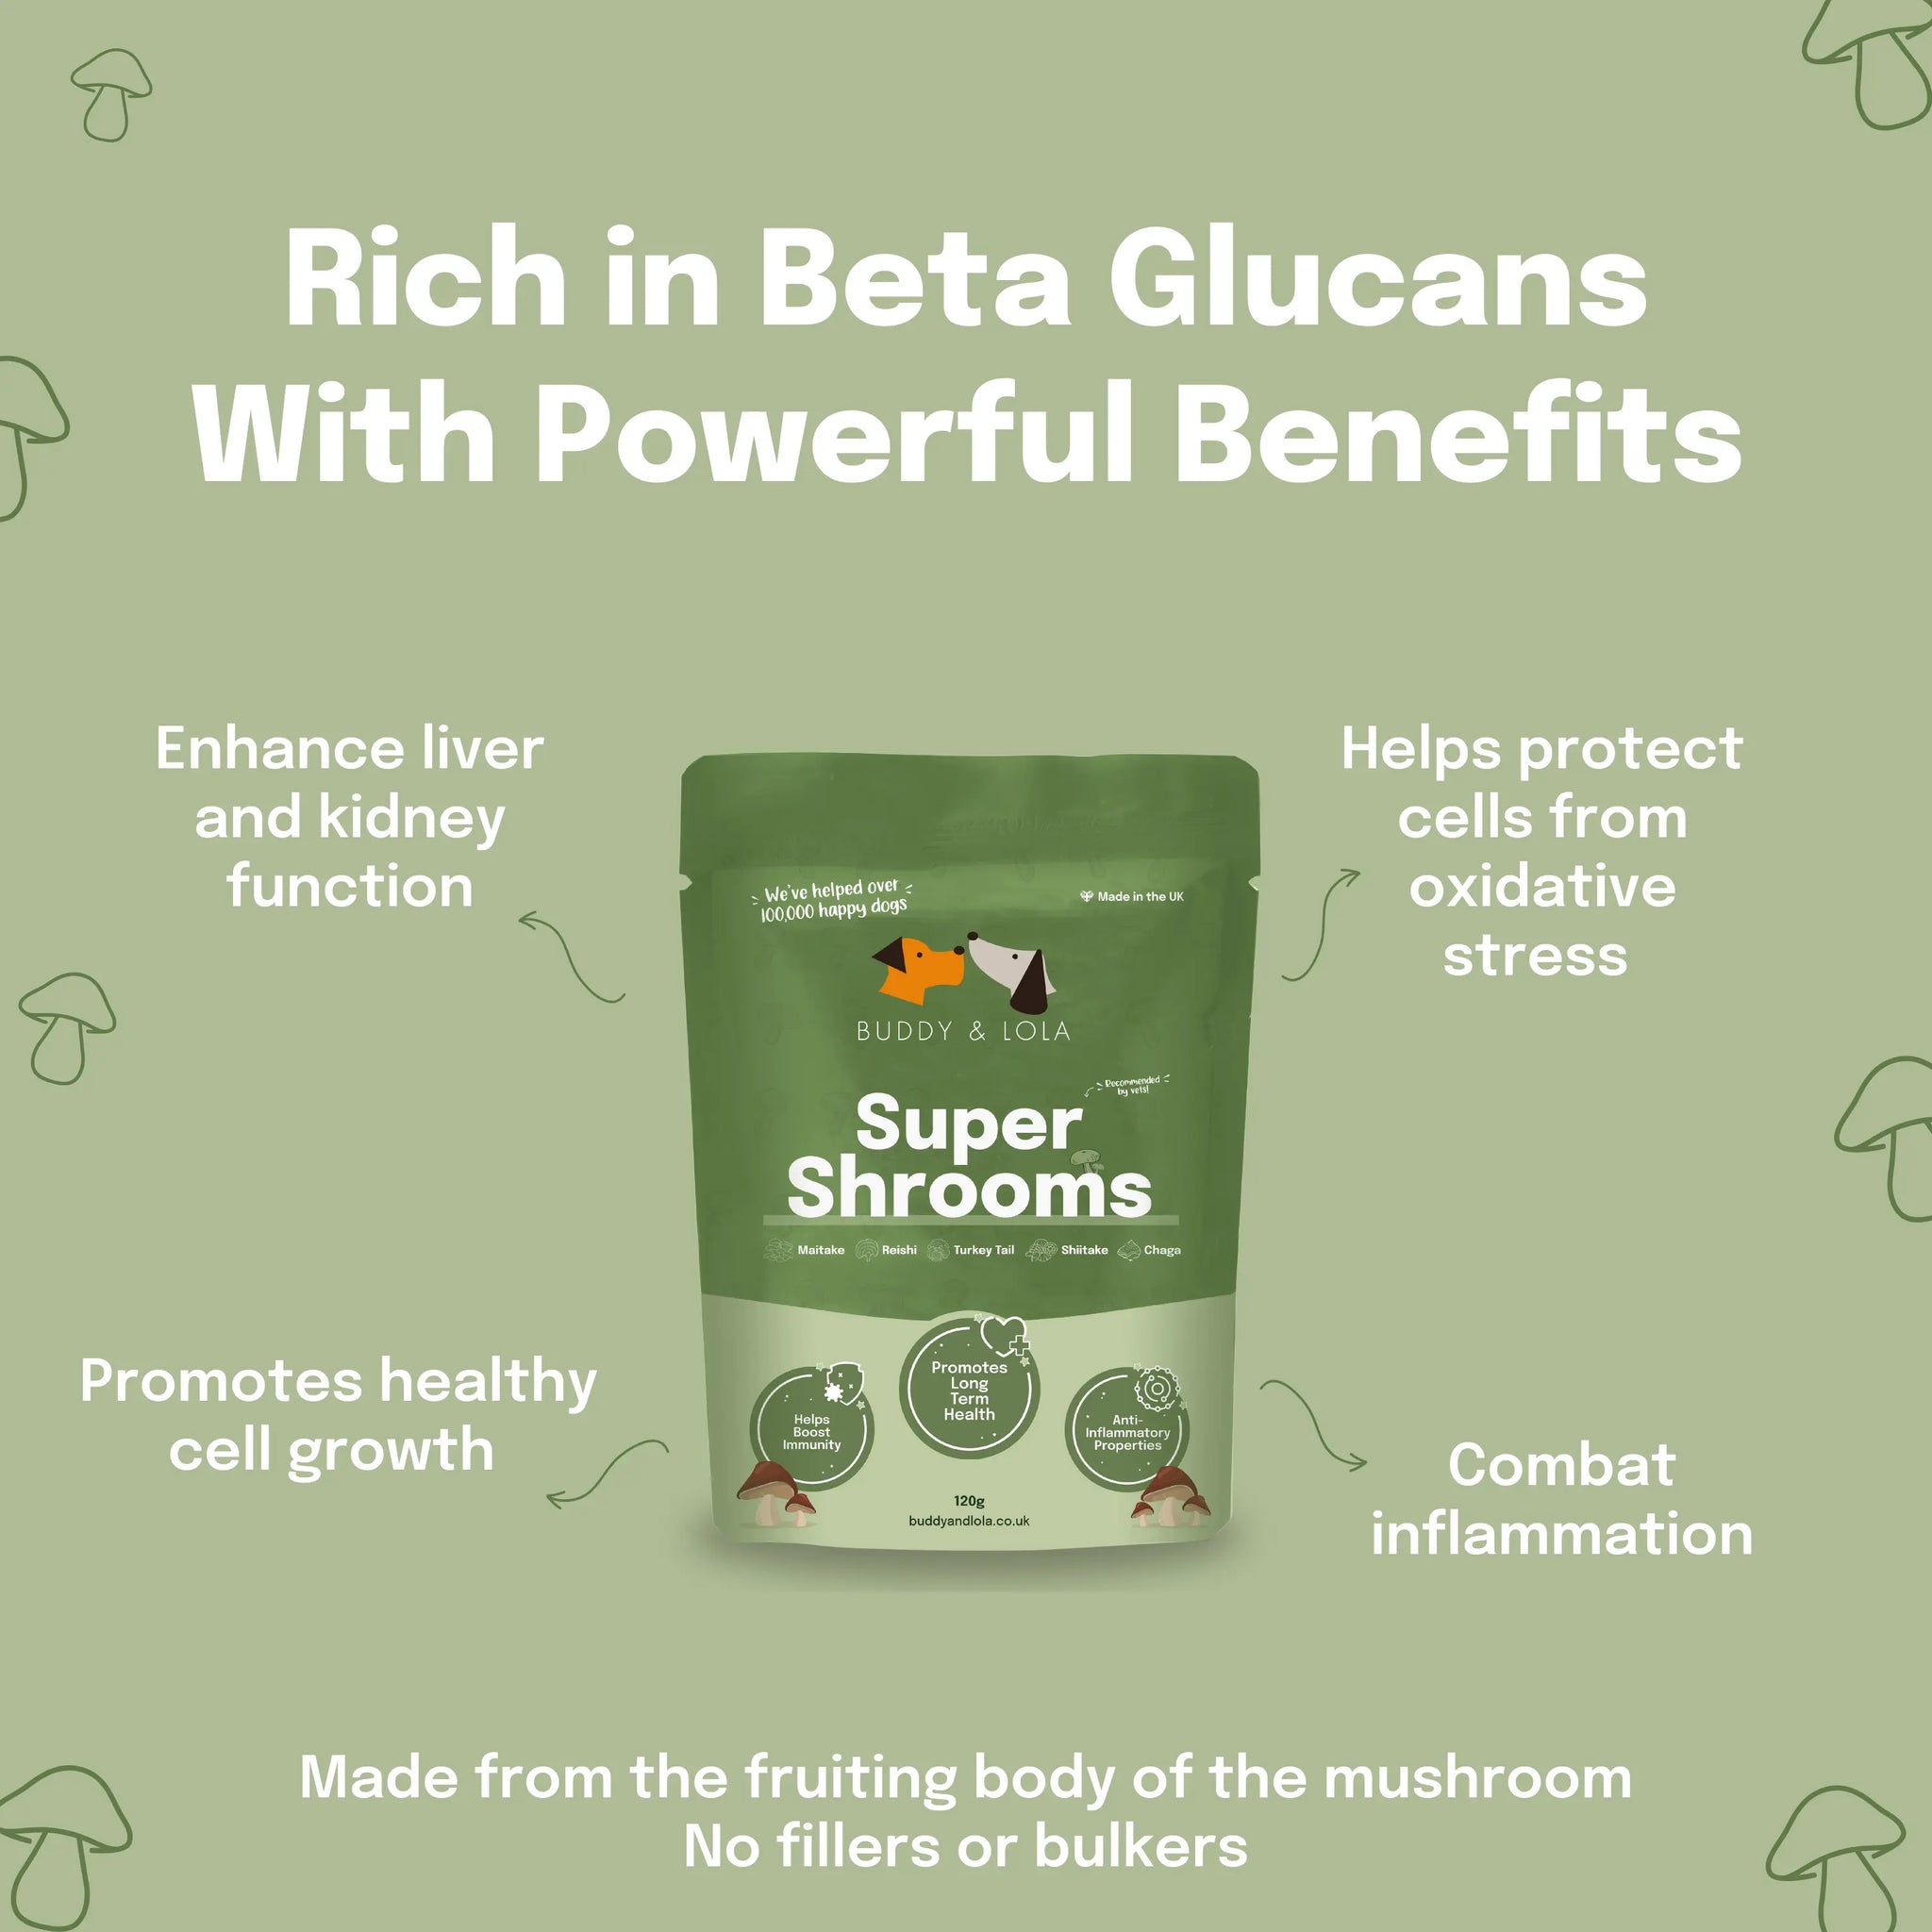 How Super Shrooms is rich in beta glucans and benefits your dog